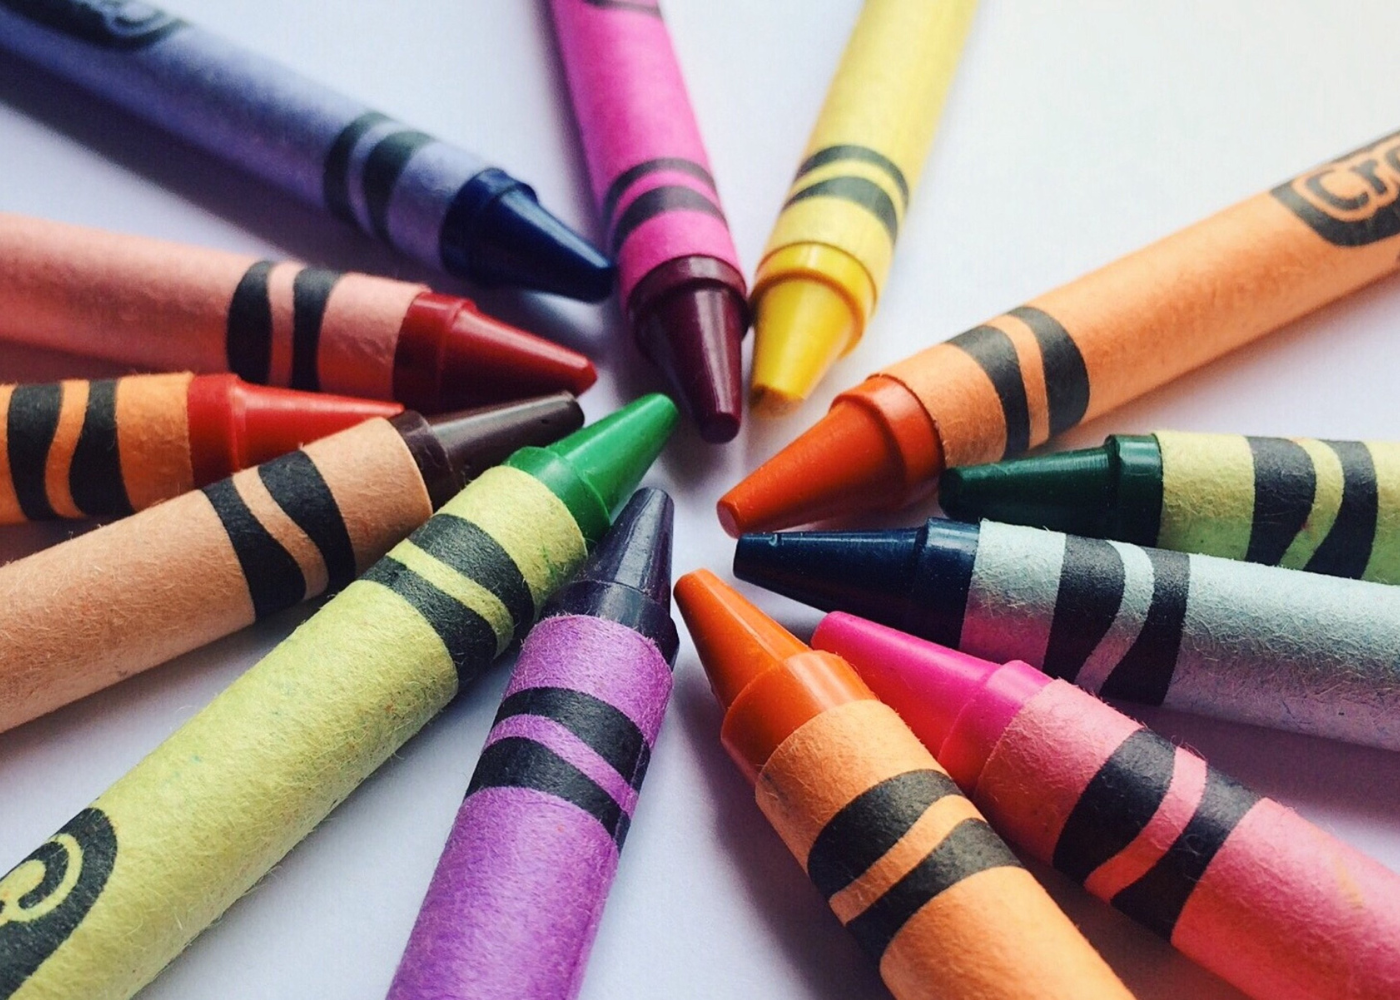 How to get crayon out of clothes